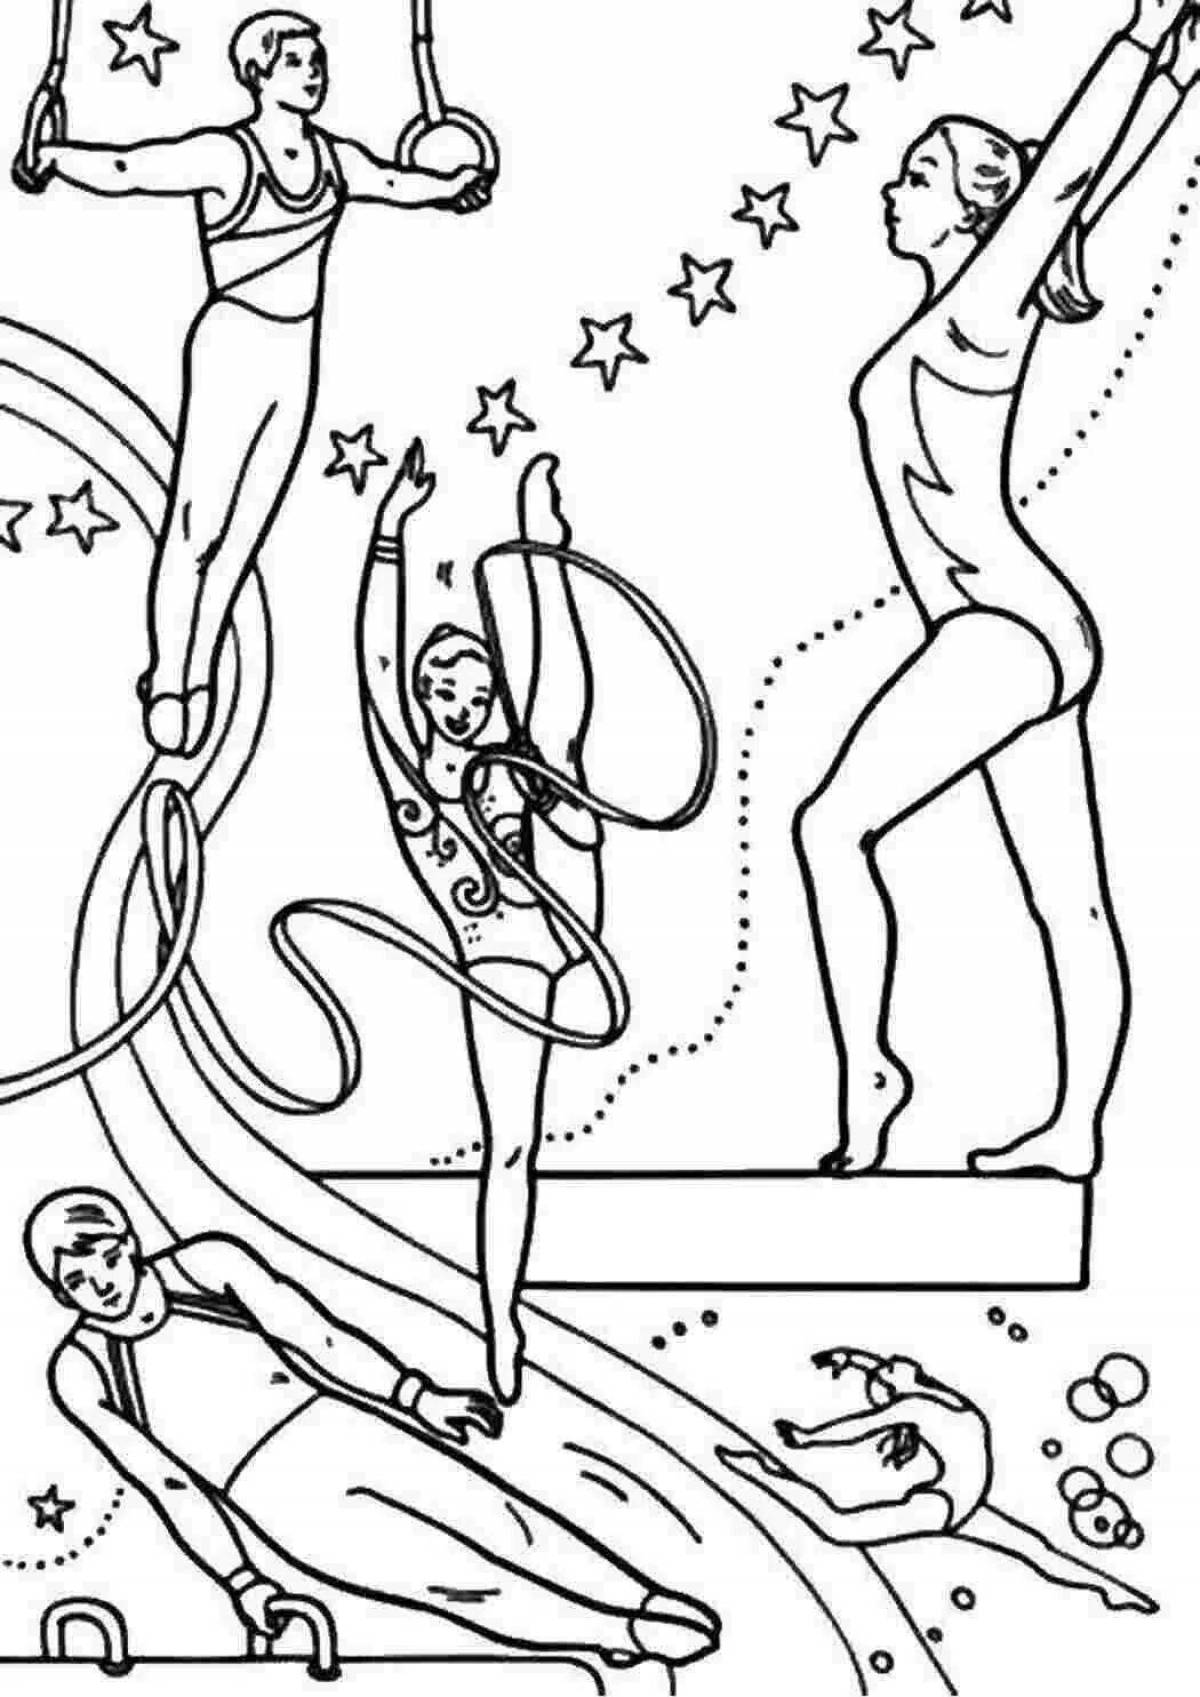 Exciting gymnastics coloring book for girls